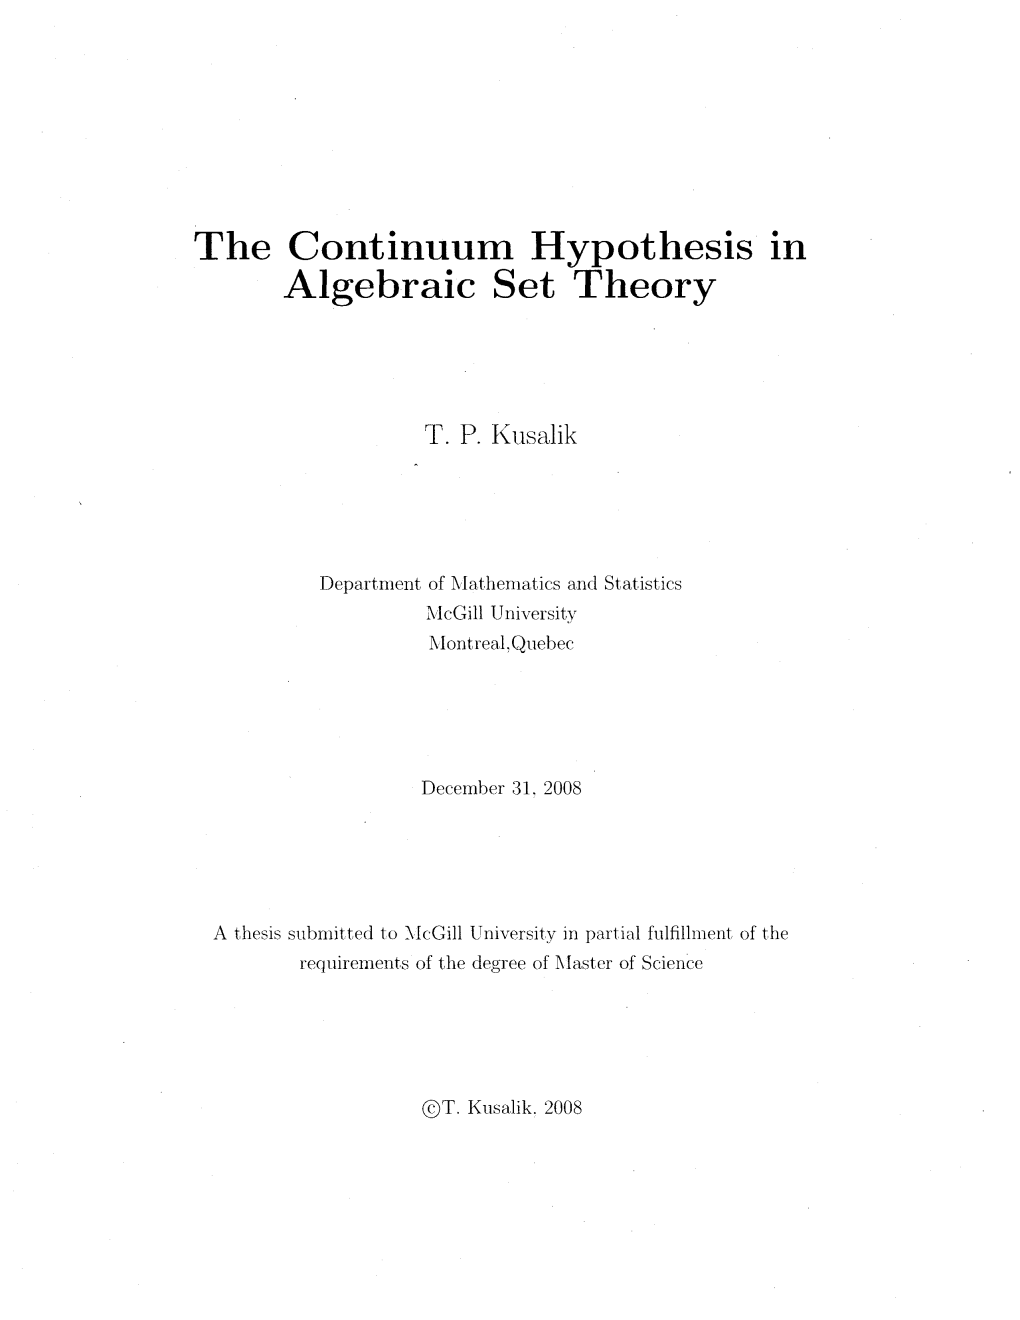 The Continuum Hypothesis in Algebraic Set Theory